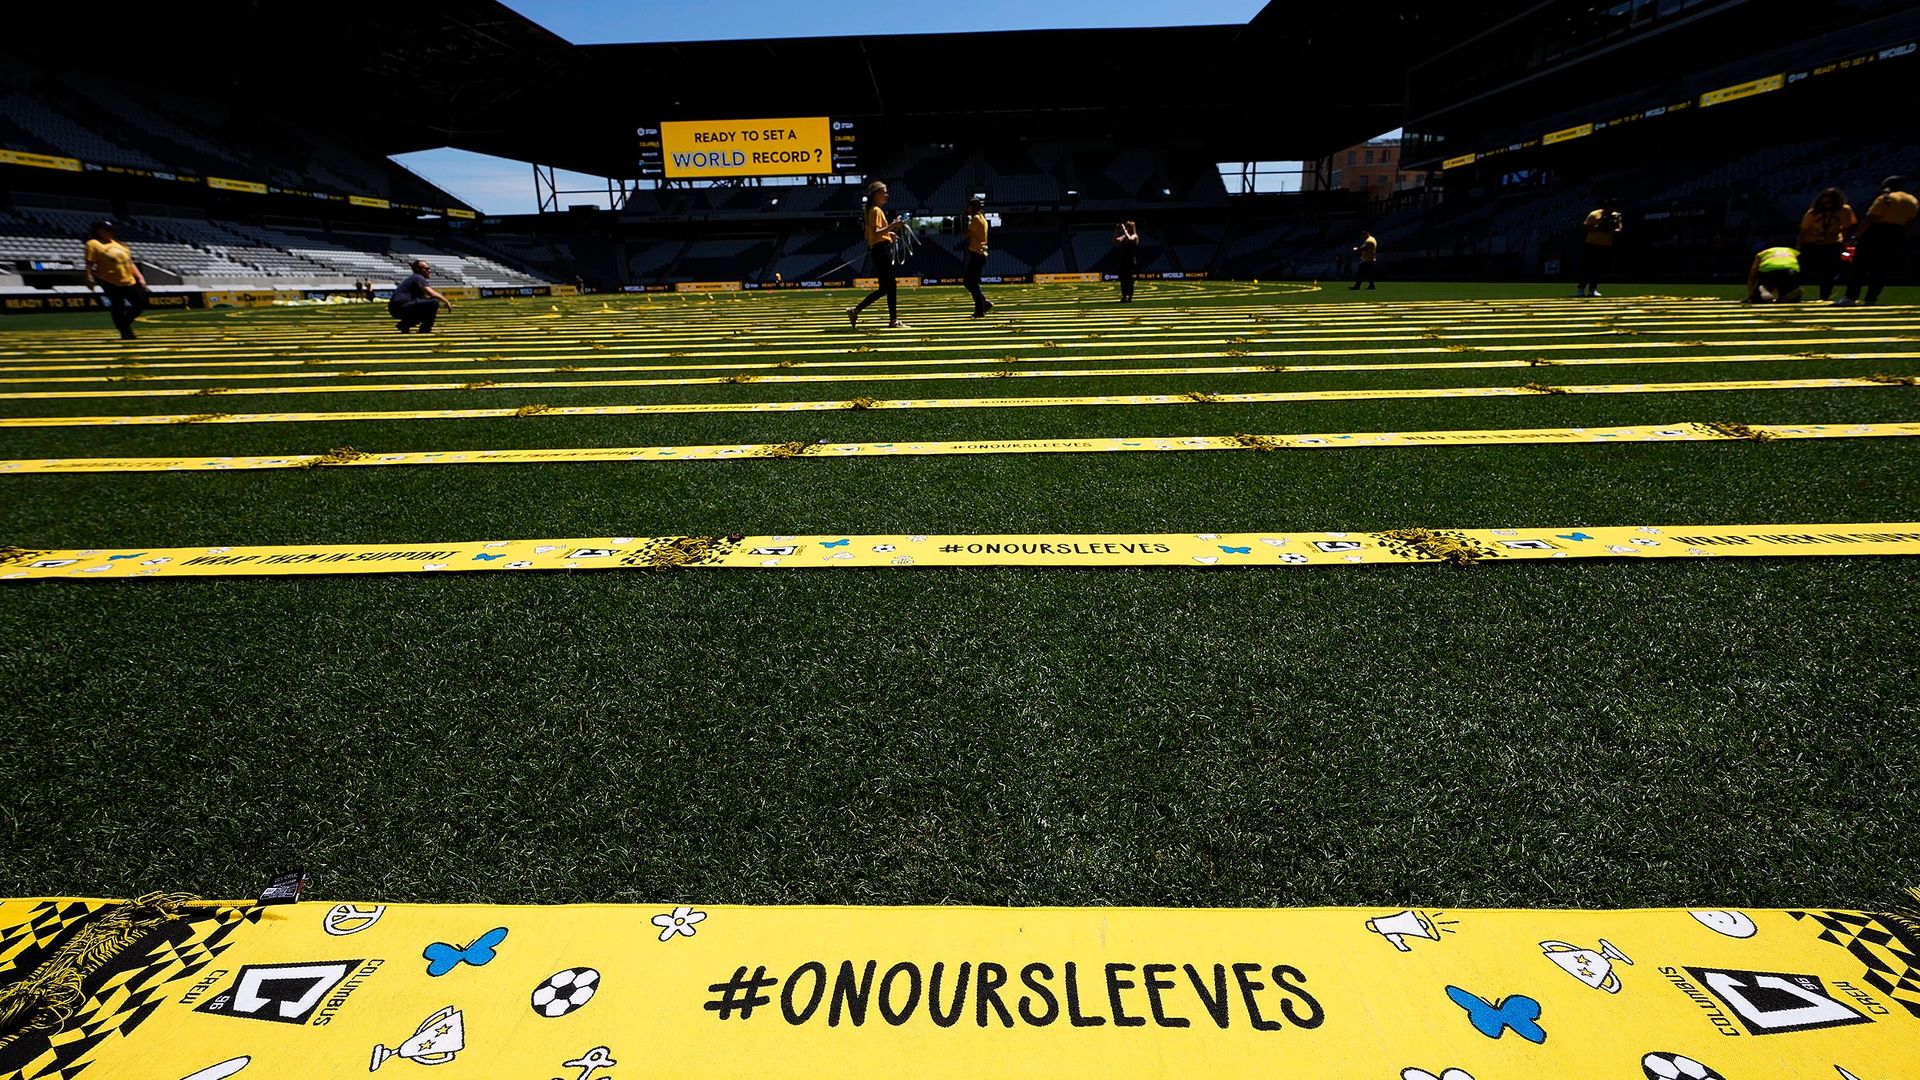 Rows of scarves on the Lower.com Field pitch, with #OnOurSleeves in the foreground